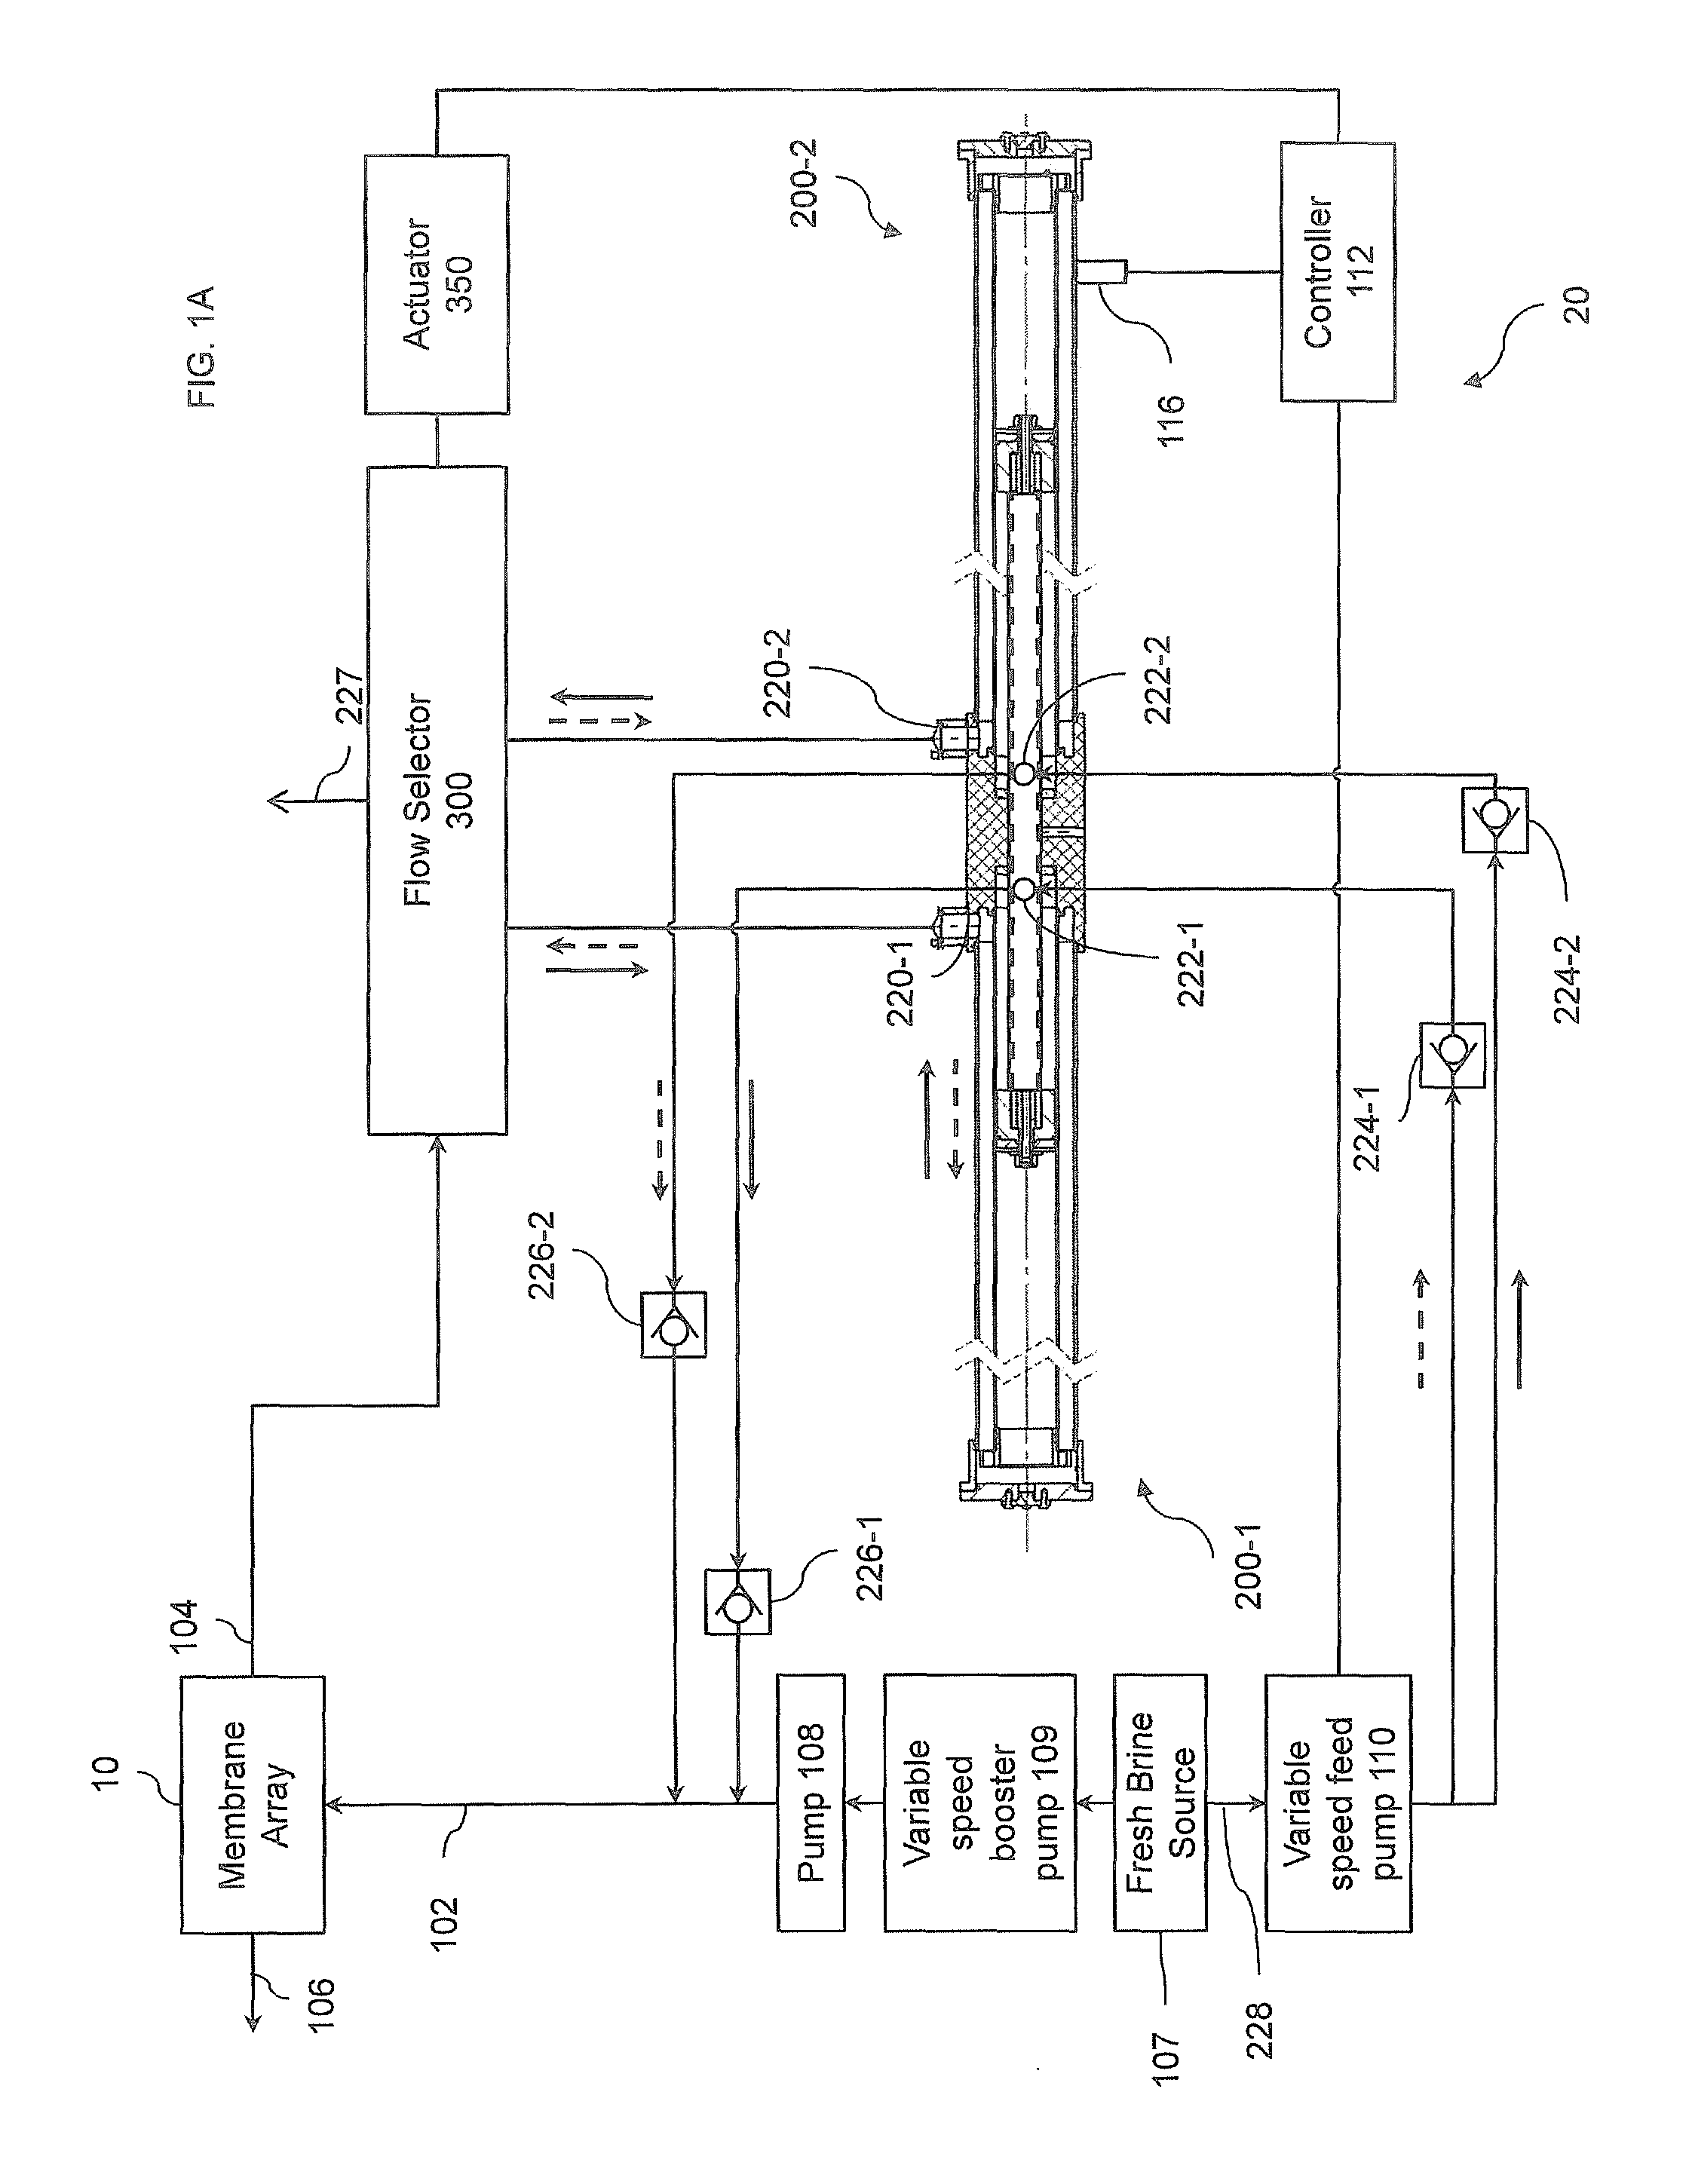 Cylinder arrangement and method of use for energy recovery with seawater desalination